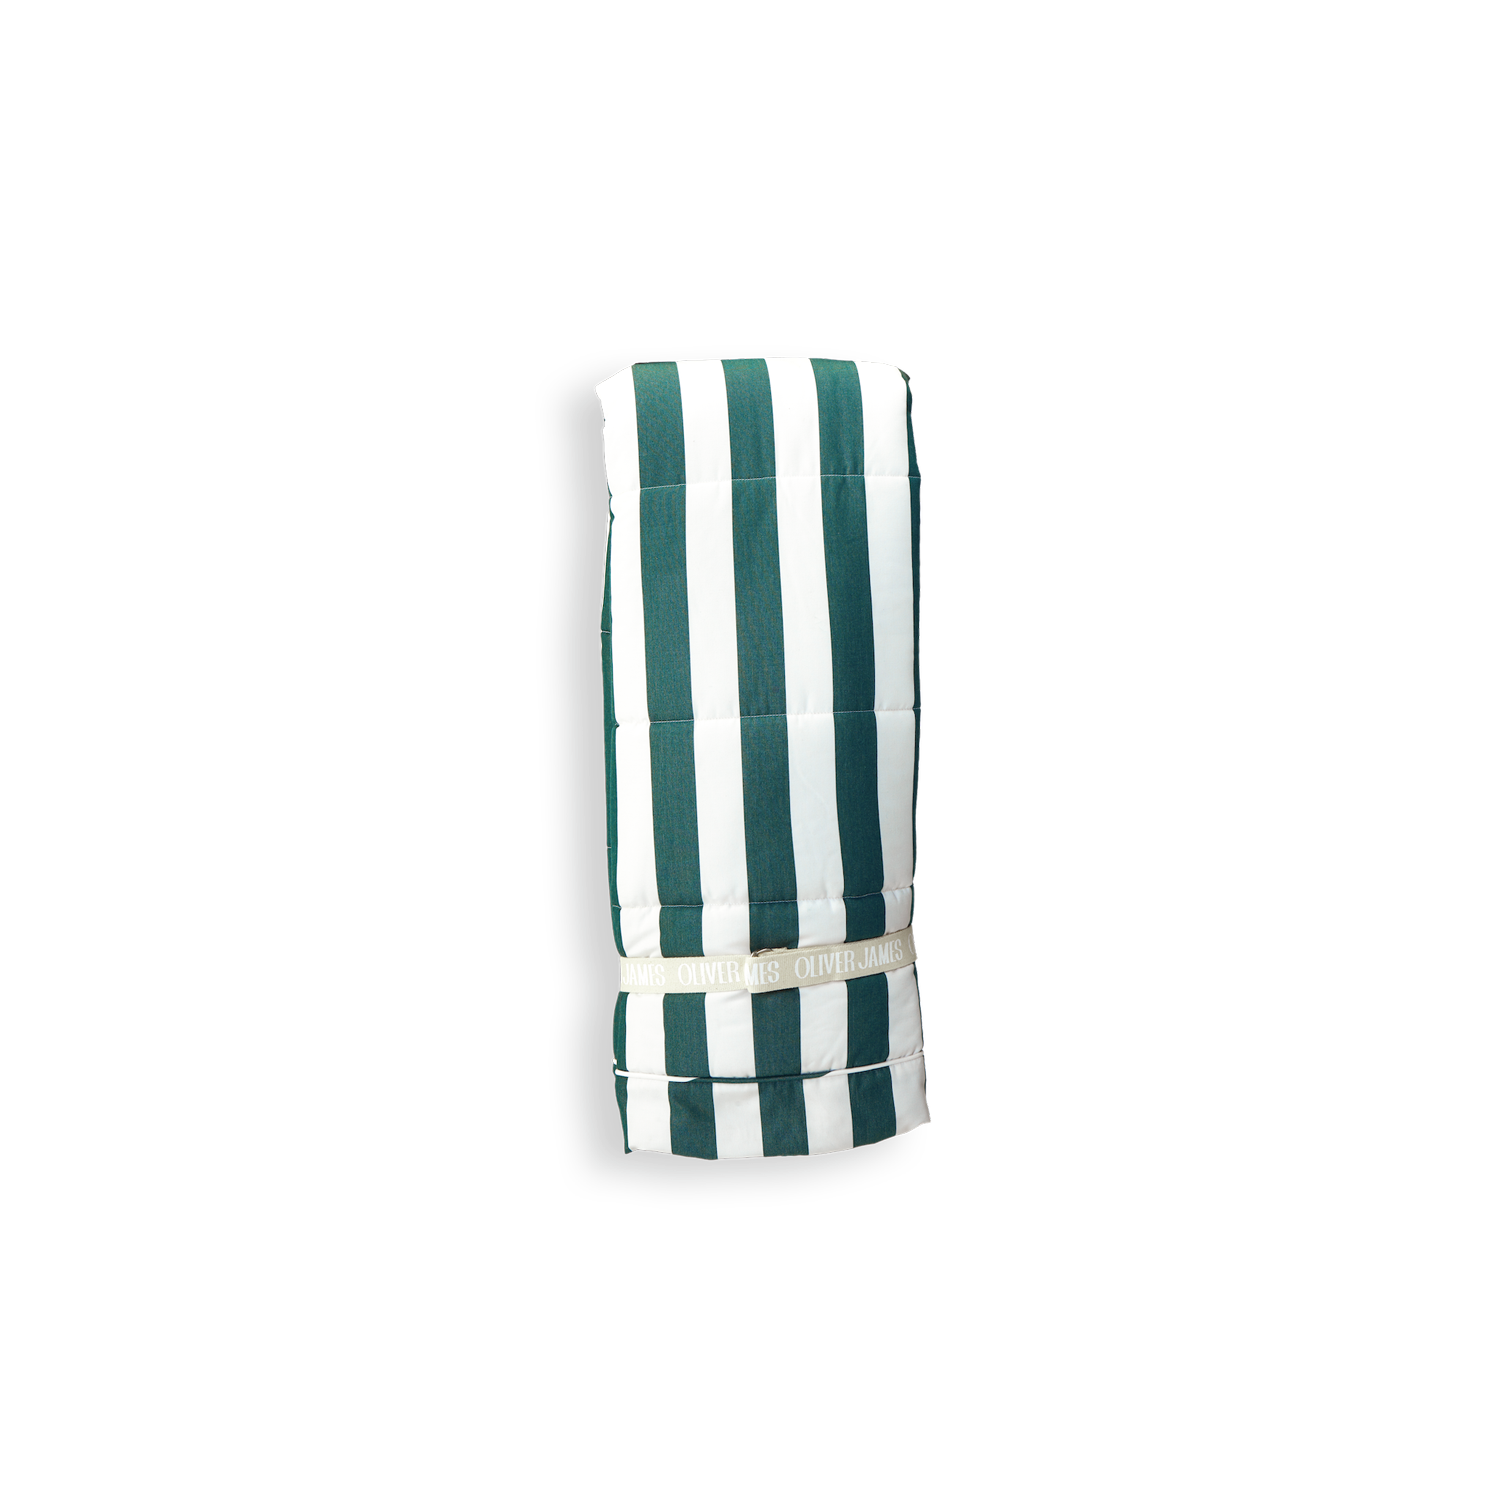 A front view of a luxury pool float hanging in a green and white stripe colored fabric.